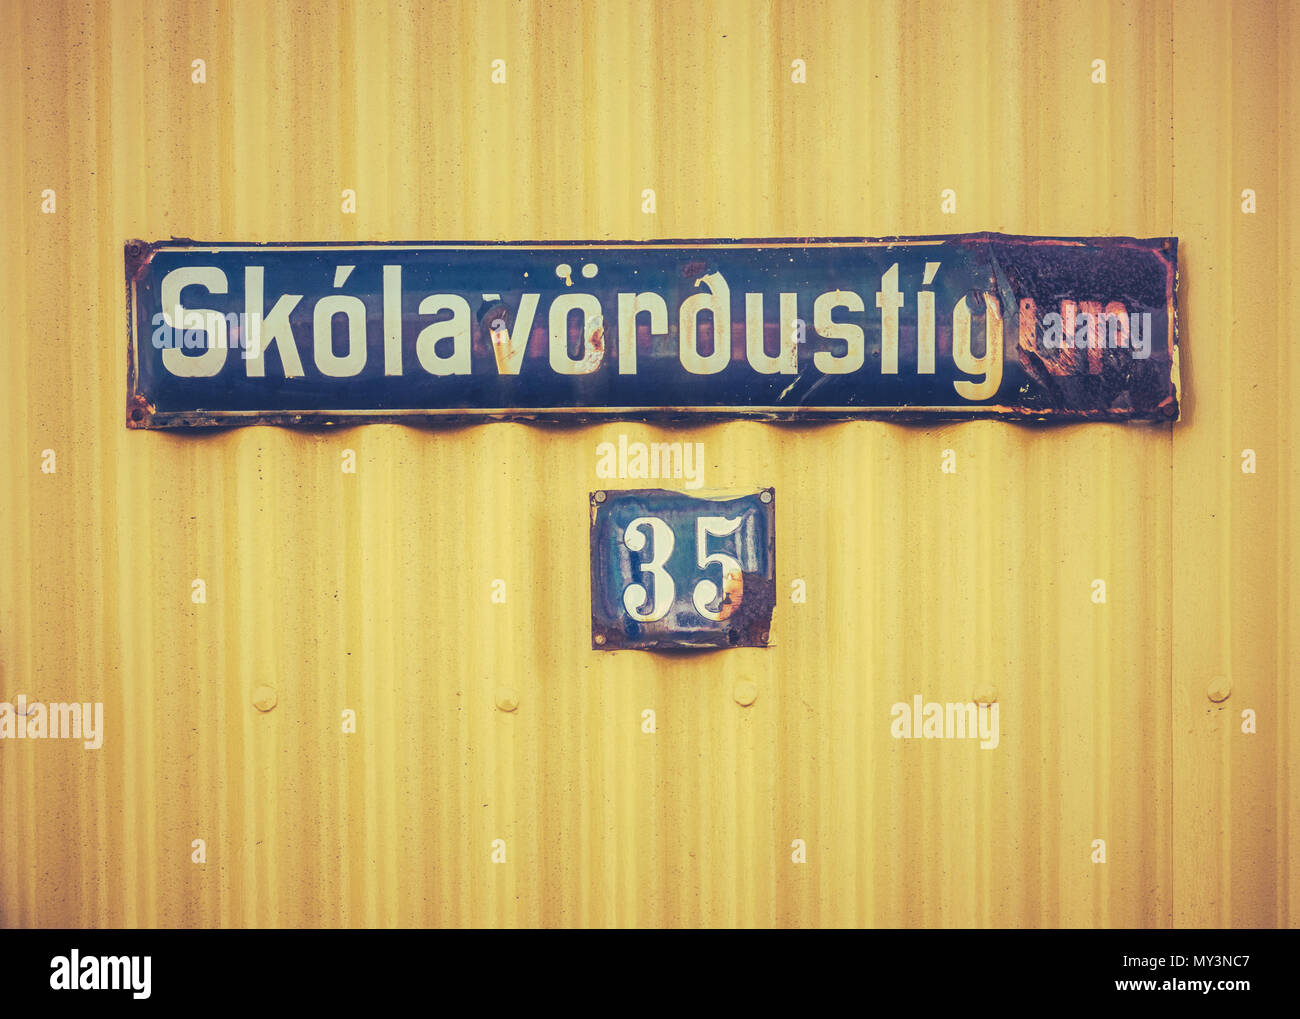 A Rustic Street Sign In Reykjavik Iceland Stock Photo